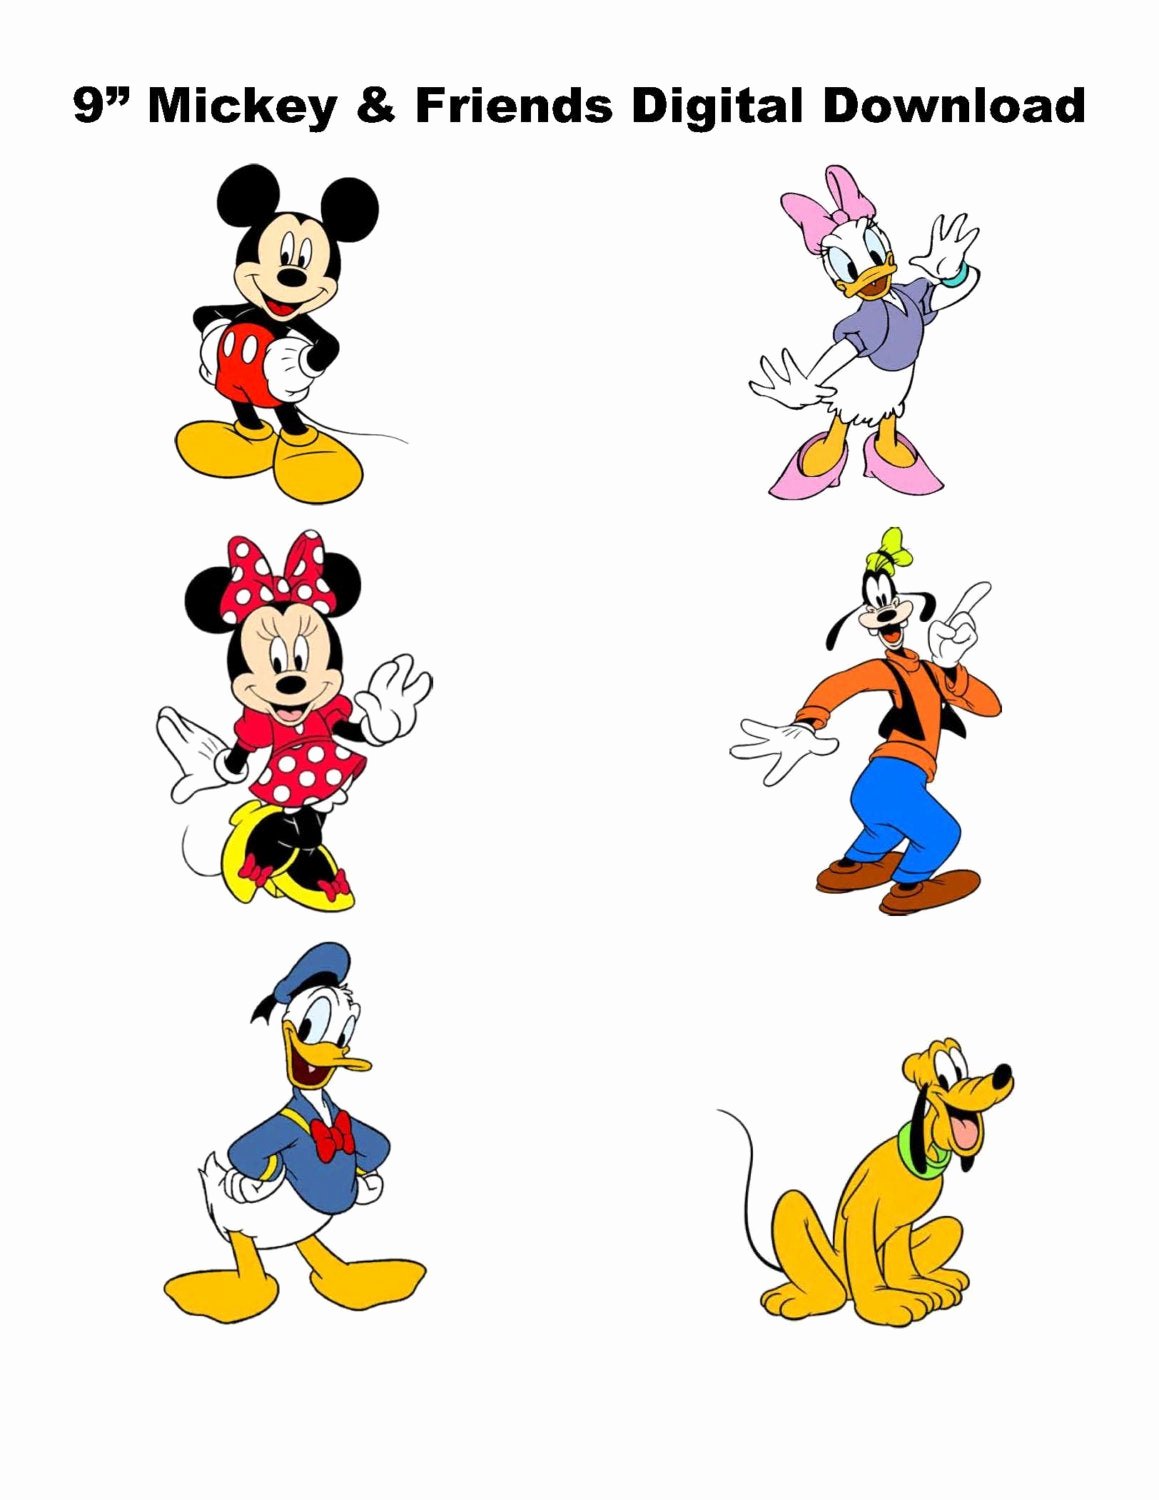 Free Printable Mickey Mouse Cutouts Best Of 9 Digital Mickey and Friends Centerpieces Large Size